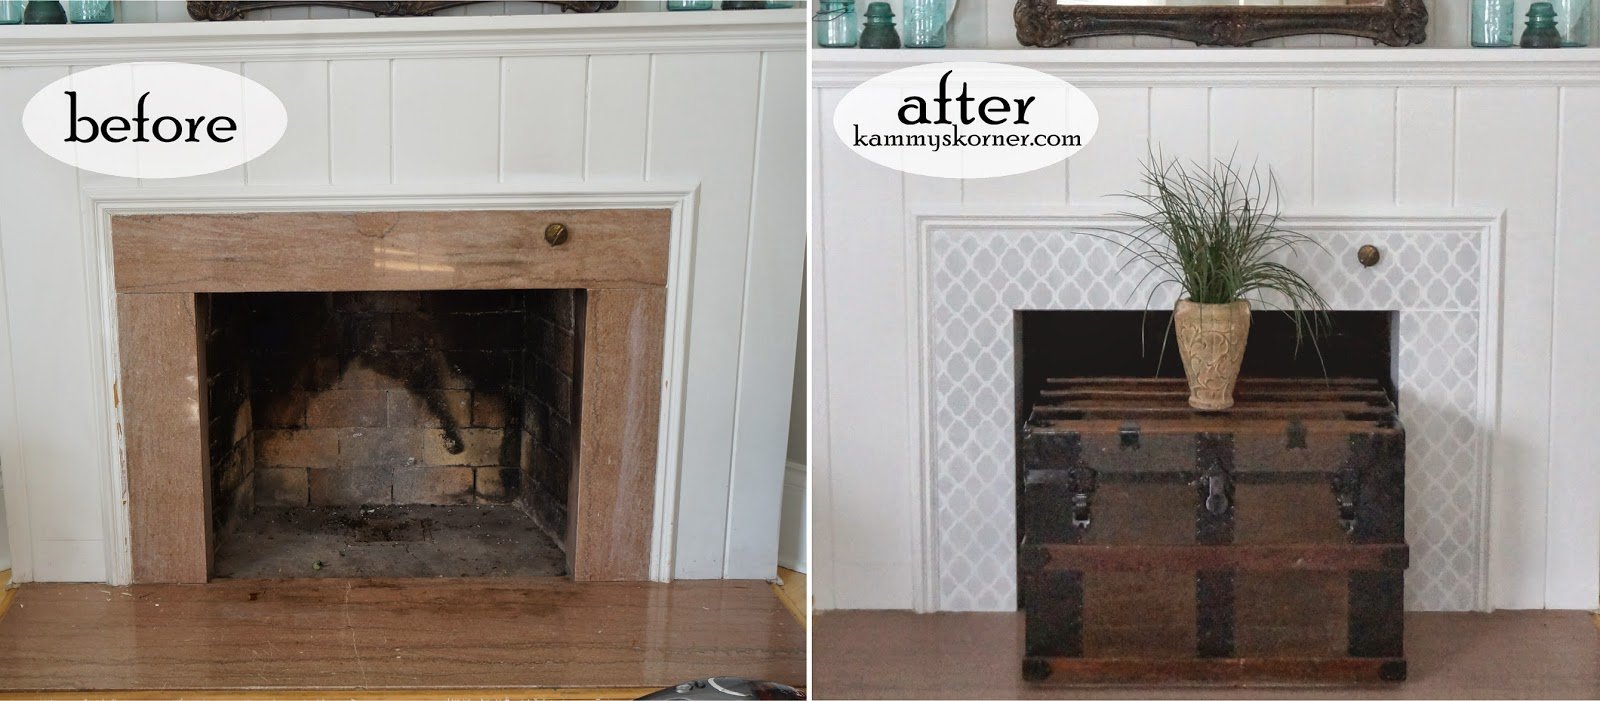 Before and After of a DIY painted granite fireplace makeover using the Rabat Craft Stencil. http://www.cuttingedgestencils.com/rabat-furniture-fabric-stencil.html